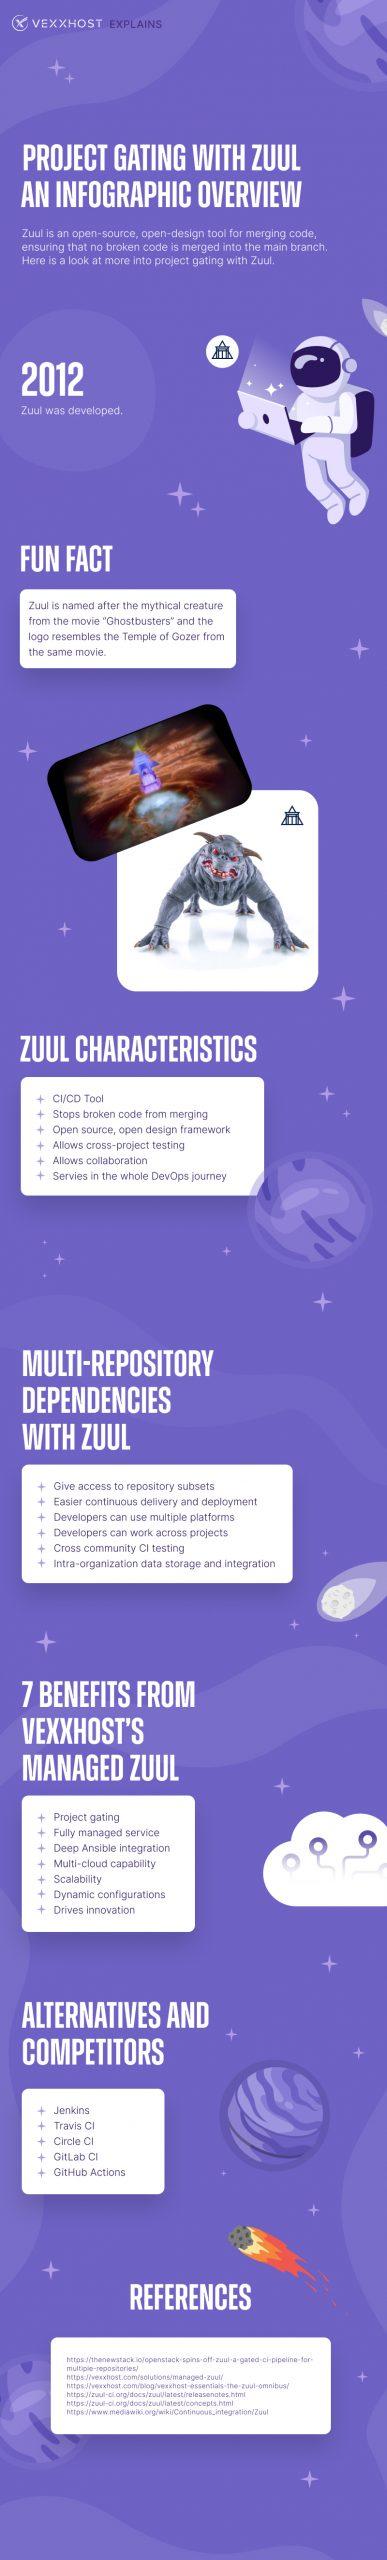 Project Gating with Zuul - An infographic Overview